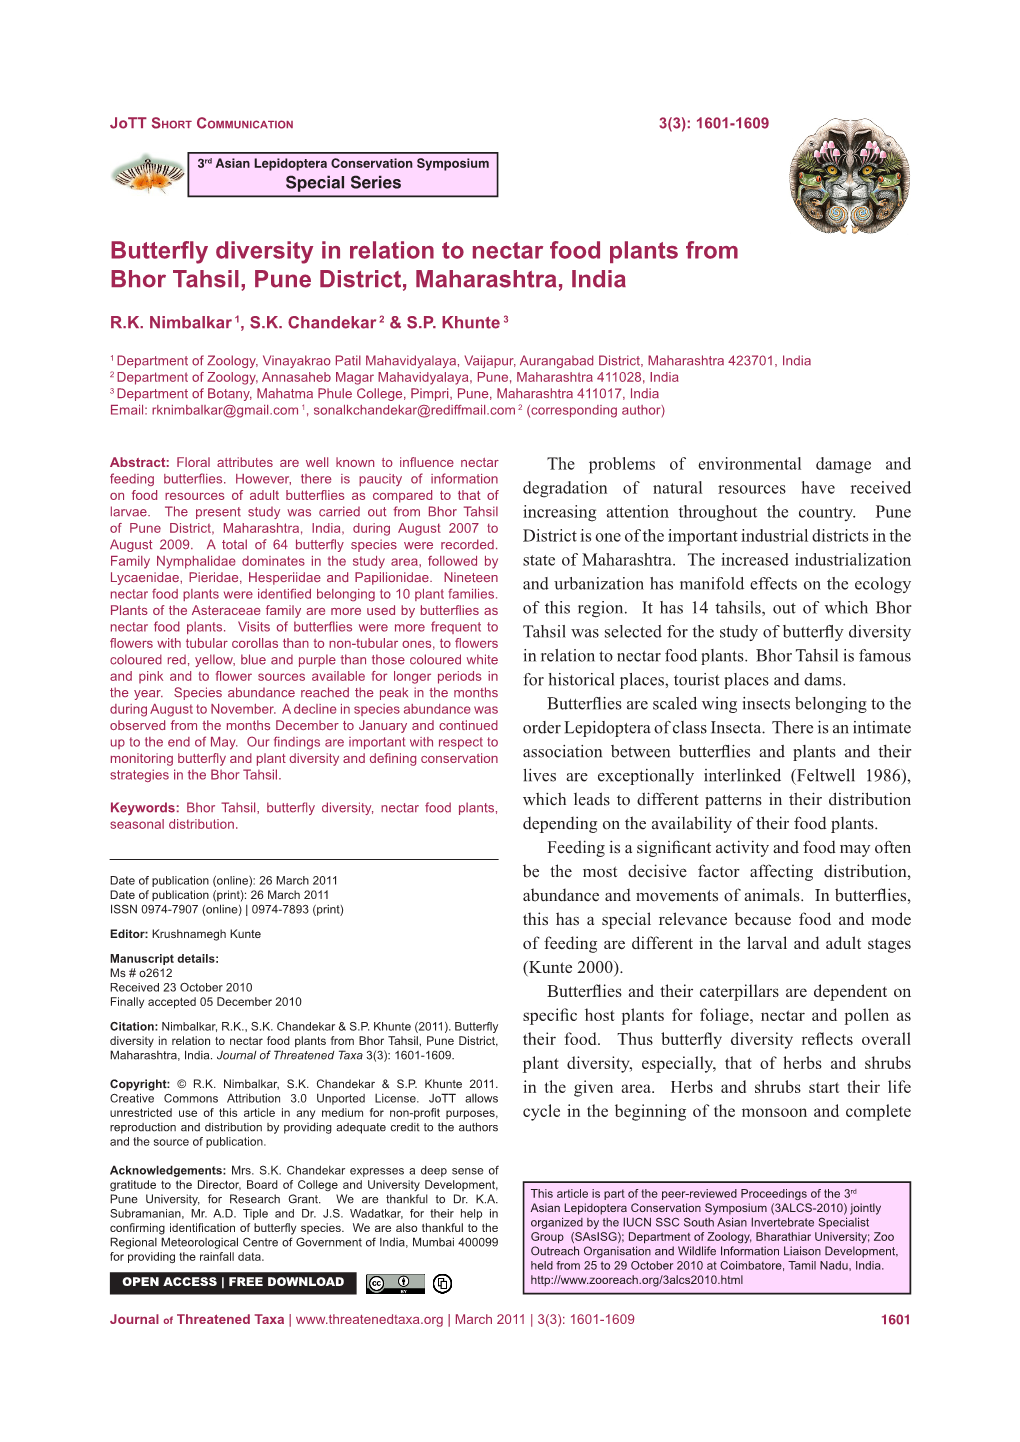 Butterfly Diversity in Relation to Nectar Food Plants from Bhor Tahsil, Pune District, Maharashtra, India